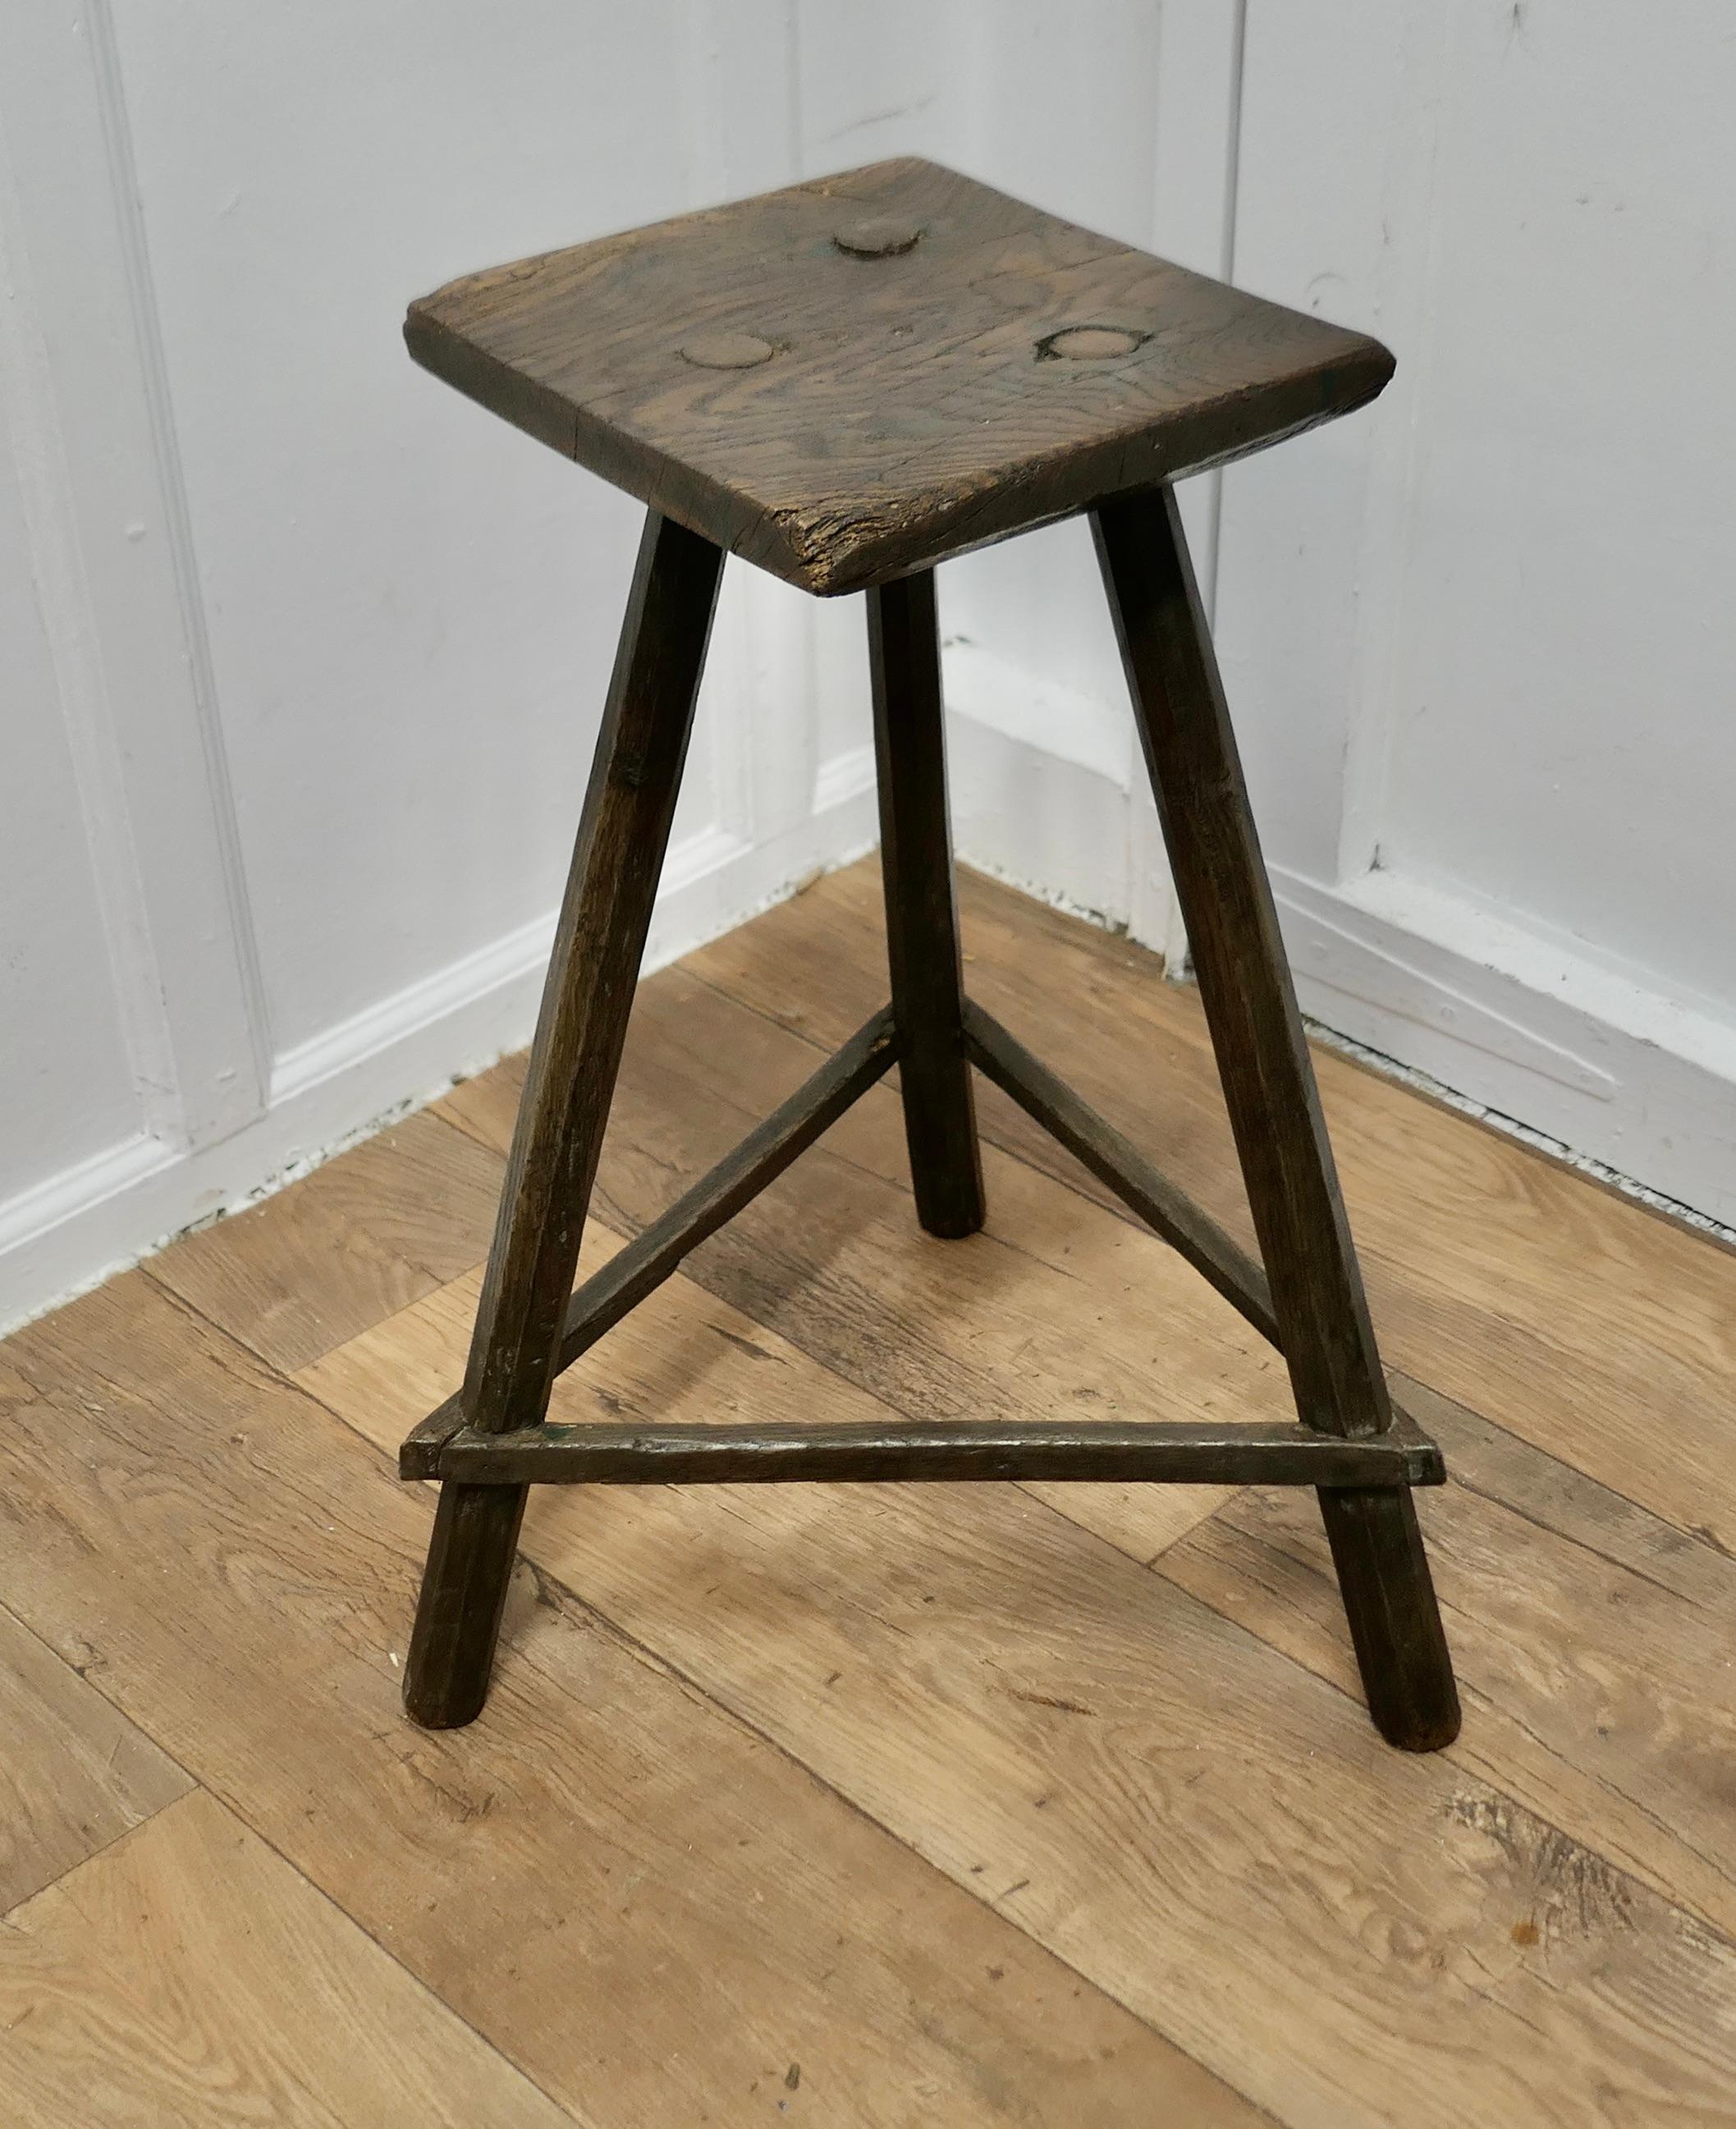 19th Century Ash and Elm Cricket Table Stool 


This is a very rare country piece, the stool is made in ash and elm, the seat is made from a solid slice of the tree you can see by the grain and the legs have faceted sides. The Stool is a very sturdy